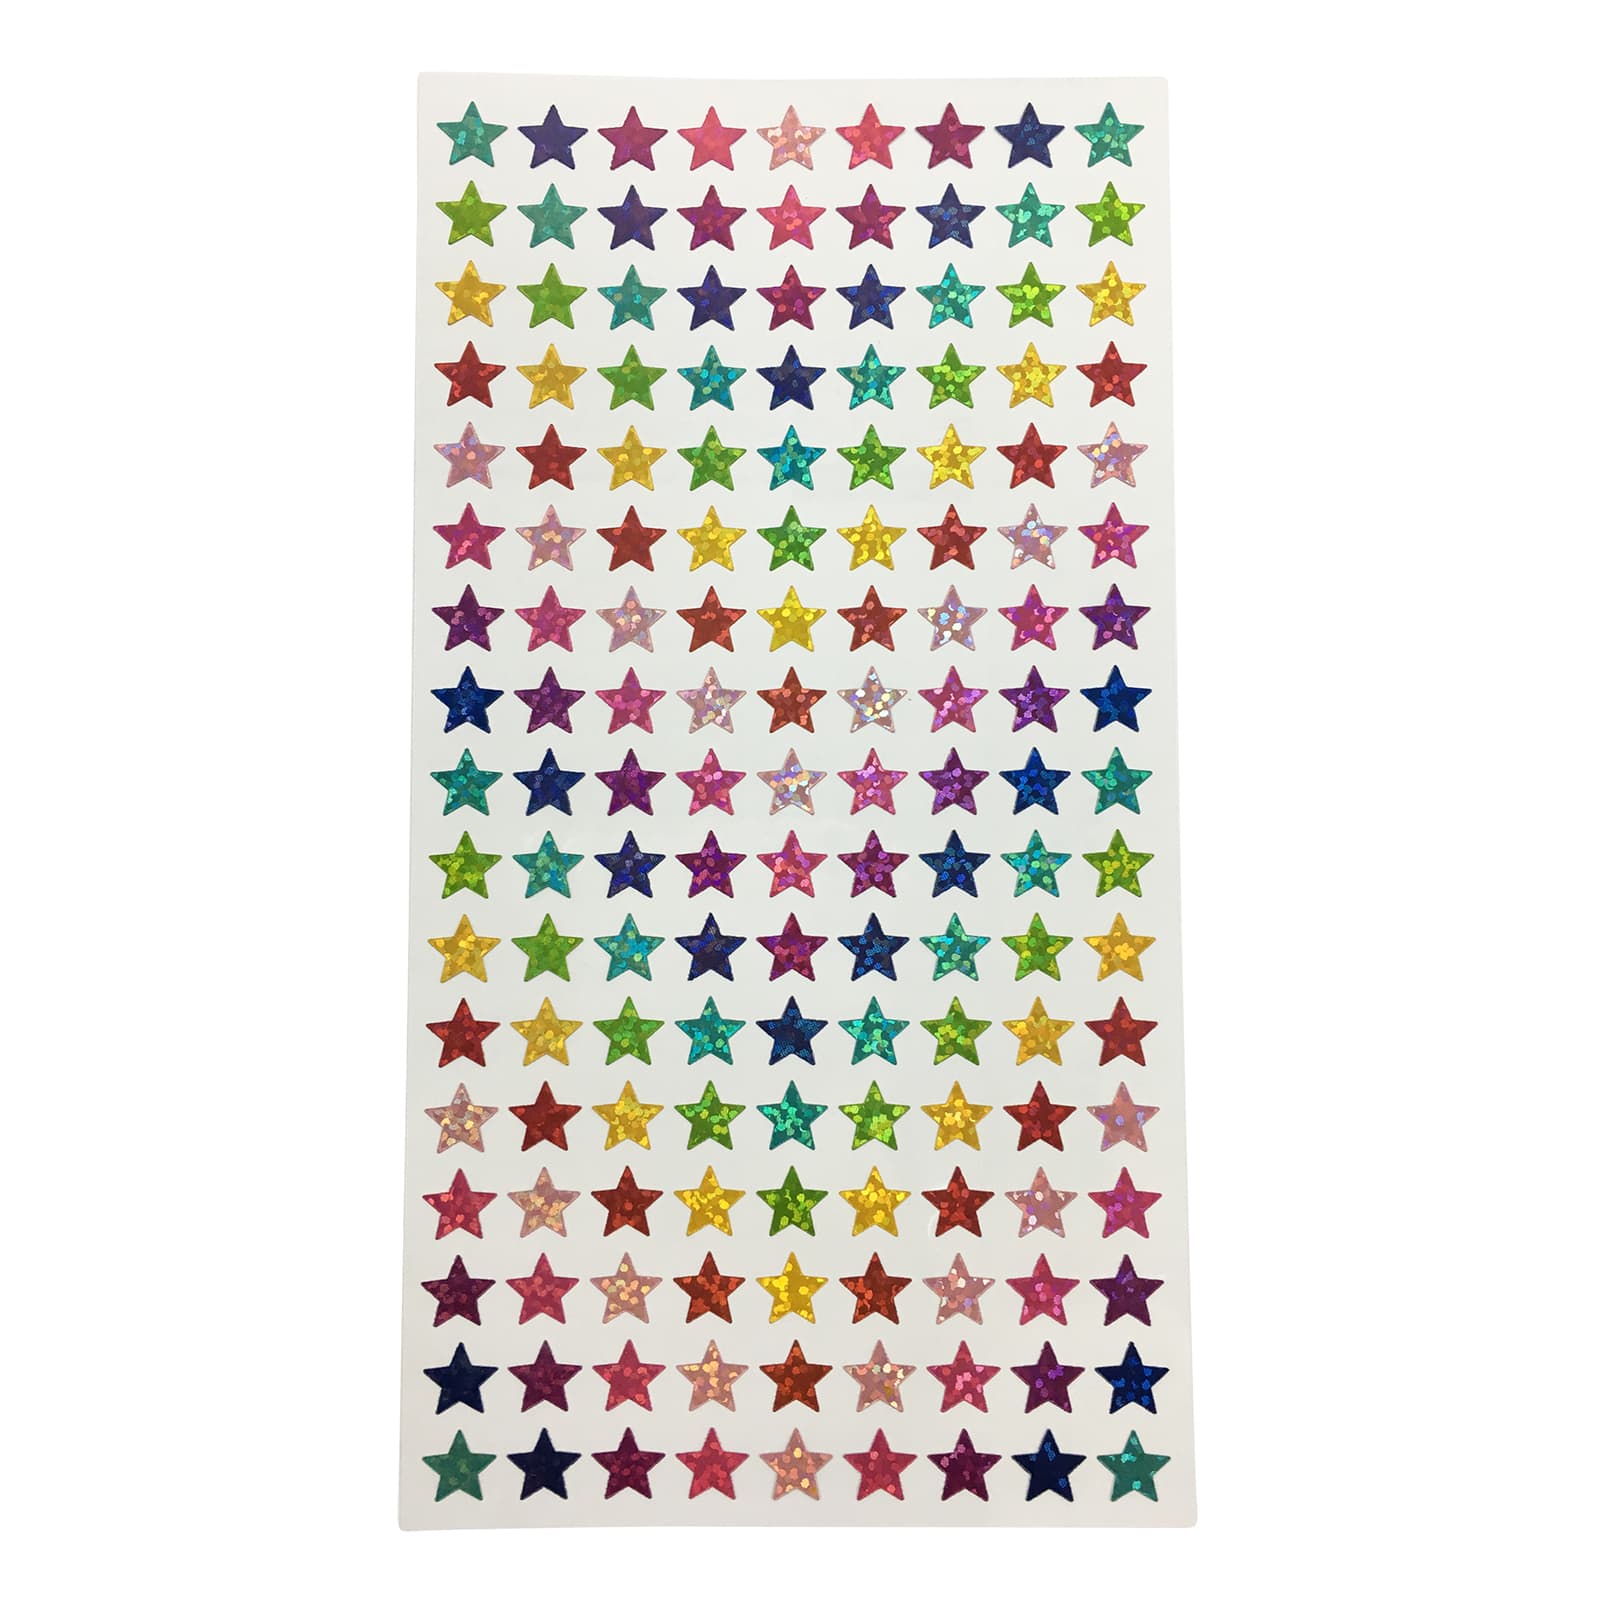 Blue and Gold Sparkly Foam Stickers, Assorted Size Star Stickers